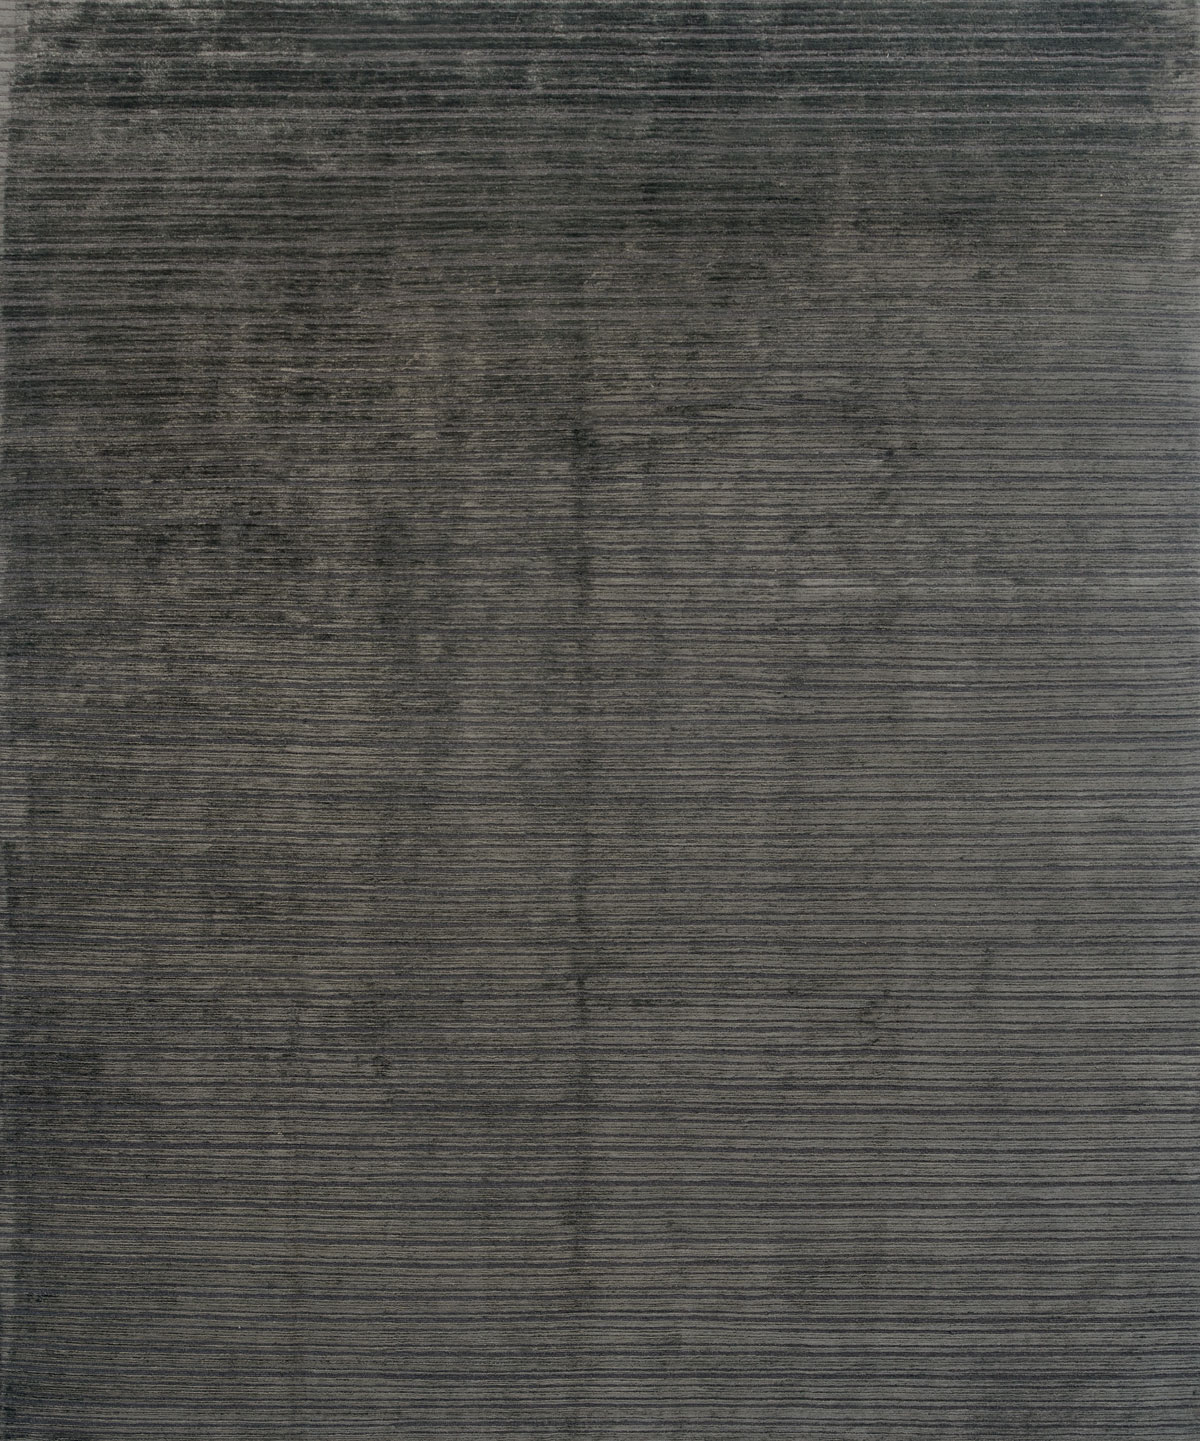 Eccelso Antracite Handknotted Rug ☞ Size: 400 x 400 cm